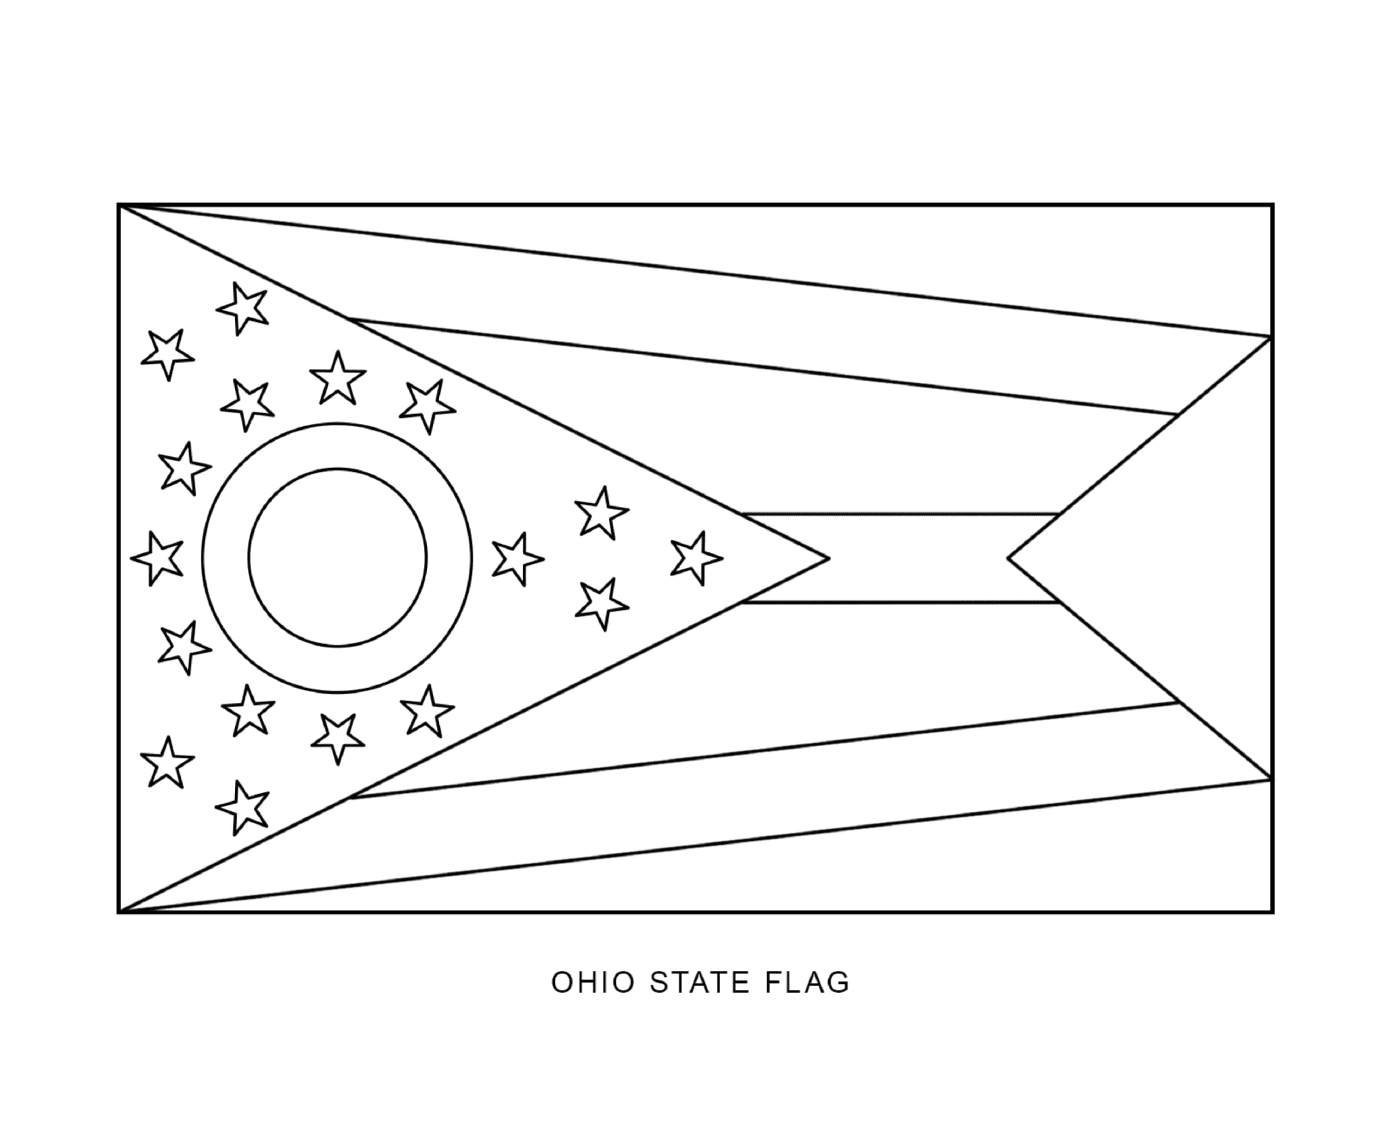  Ohio State Flag drawn in black ink 